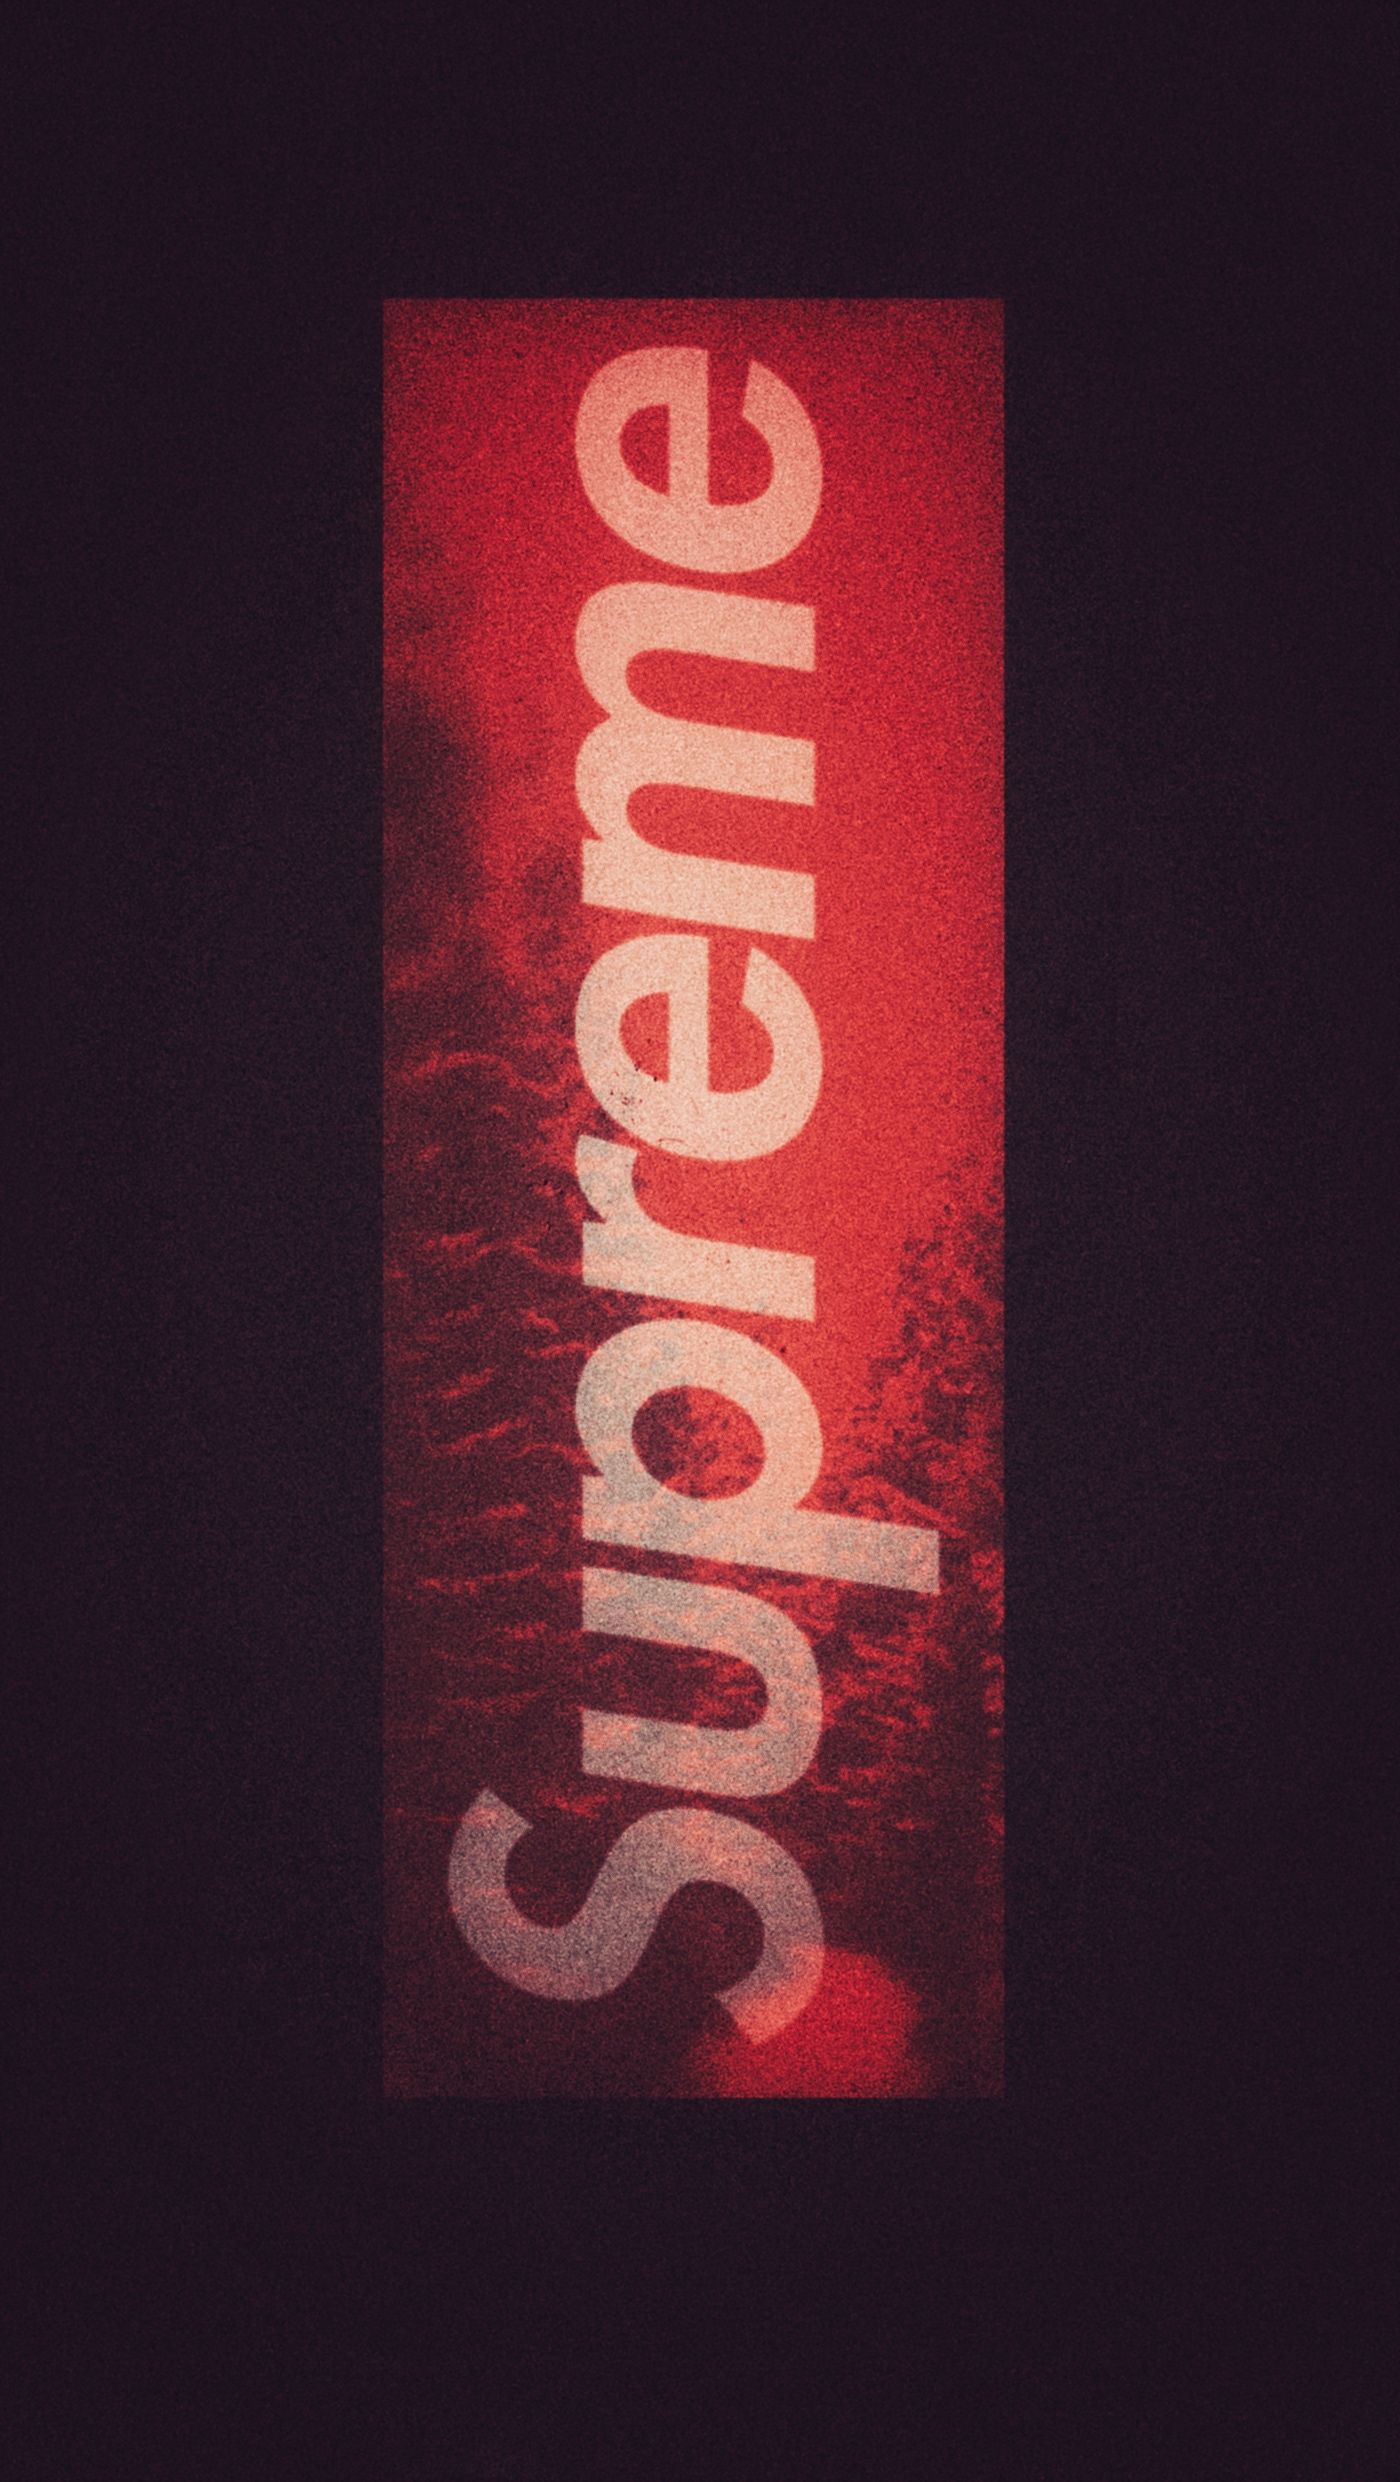 Supreme Trippy Psycho Wallpaper iPhone 6 made by me. Supreme